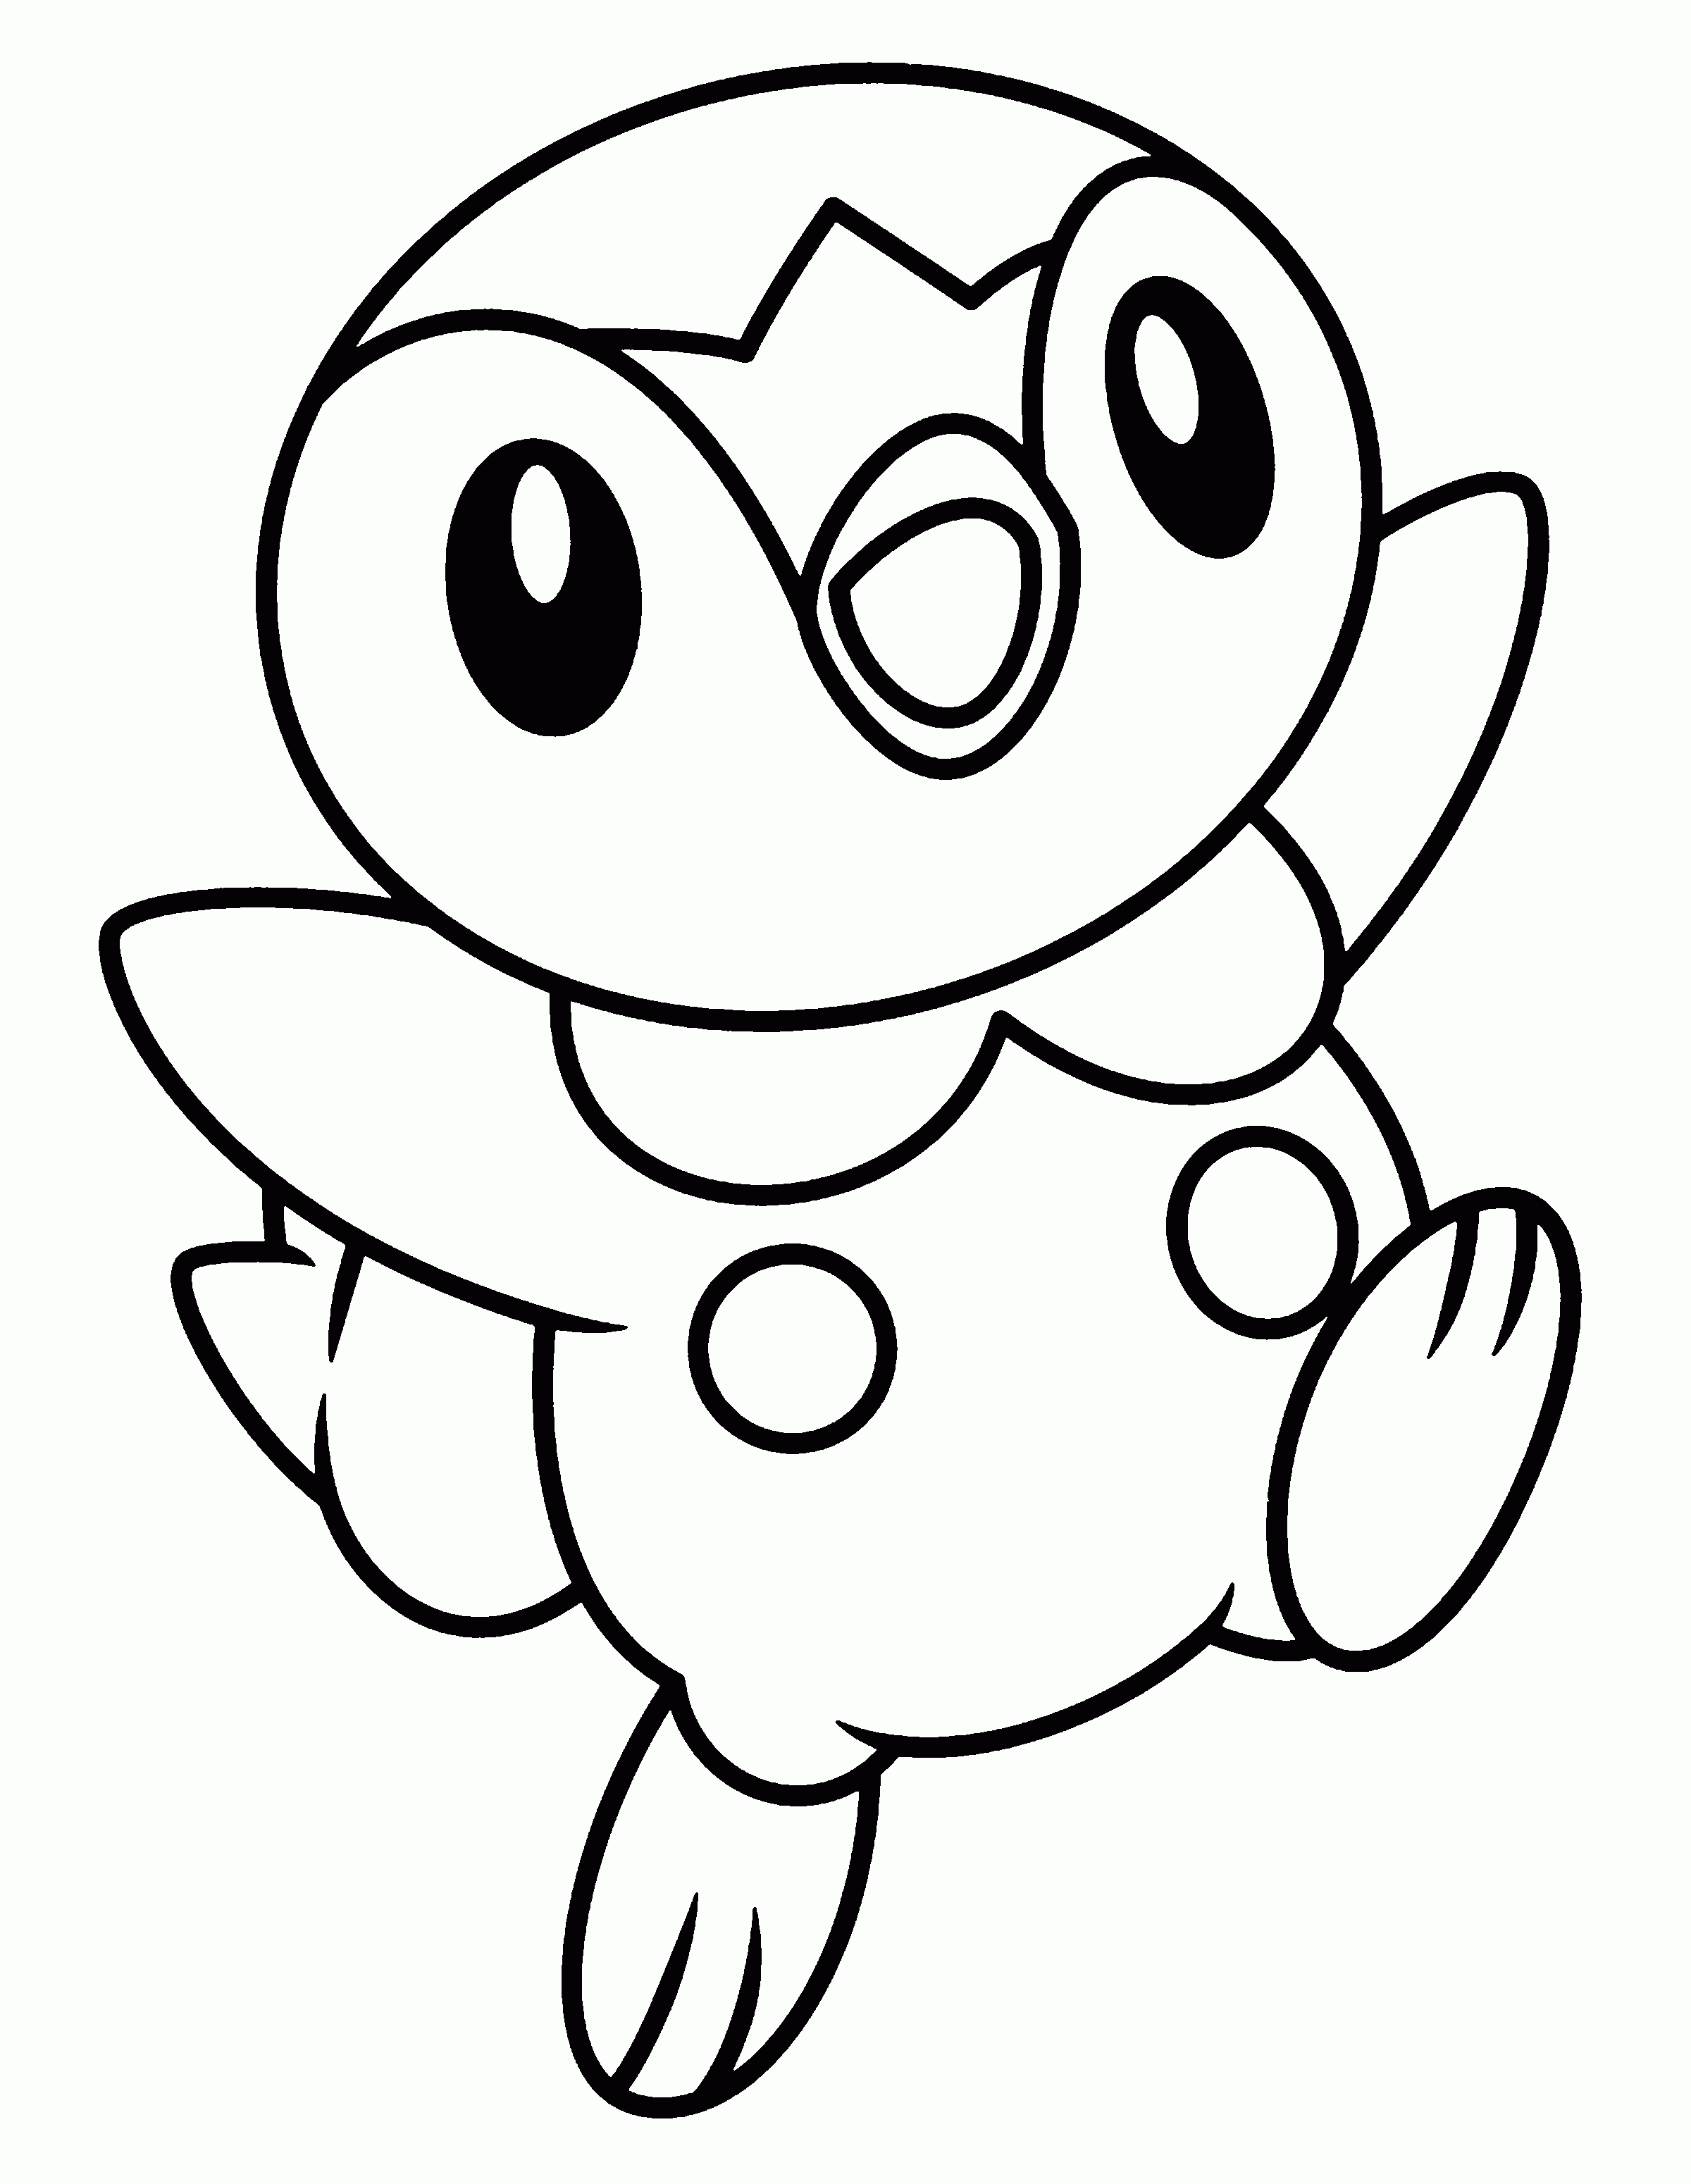 Fast Pokemon Coloring Pages Coloring Kids - Widetheme